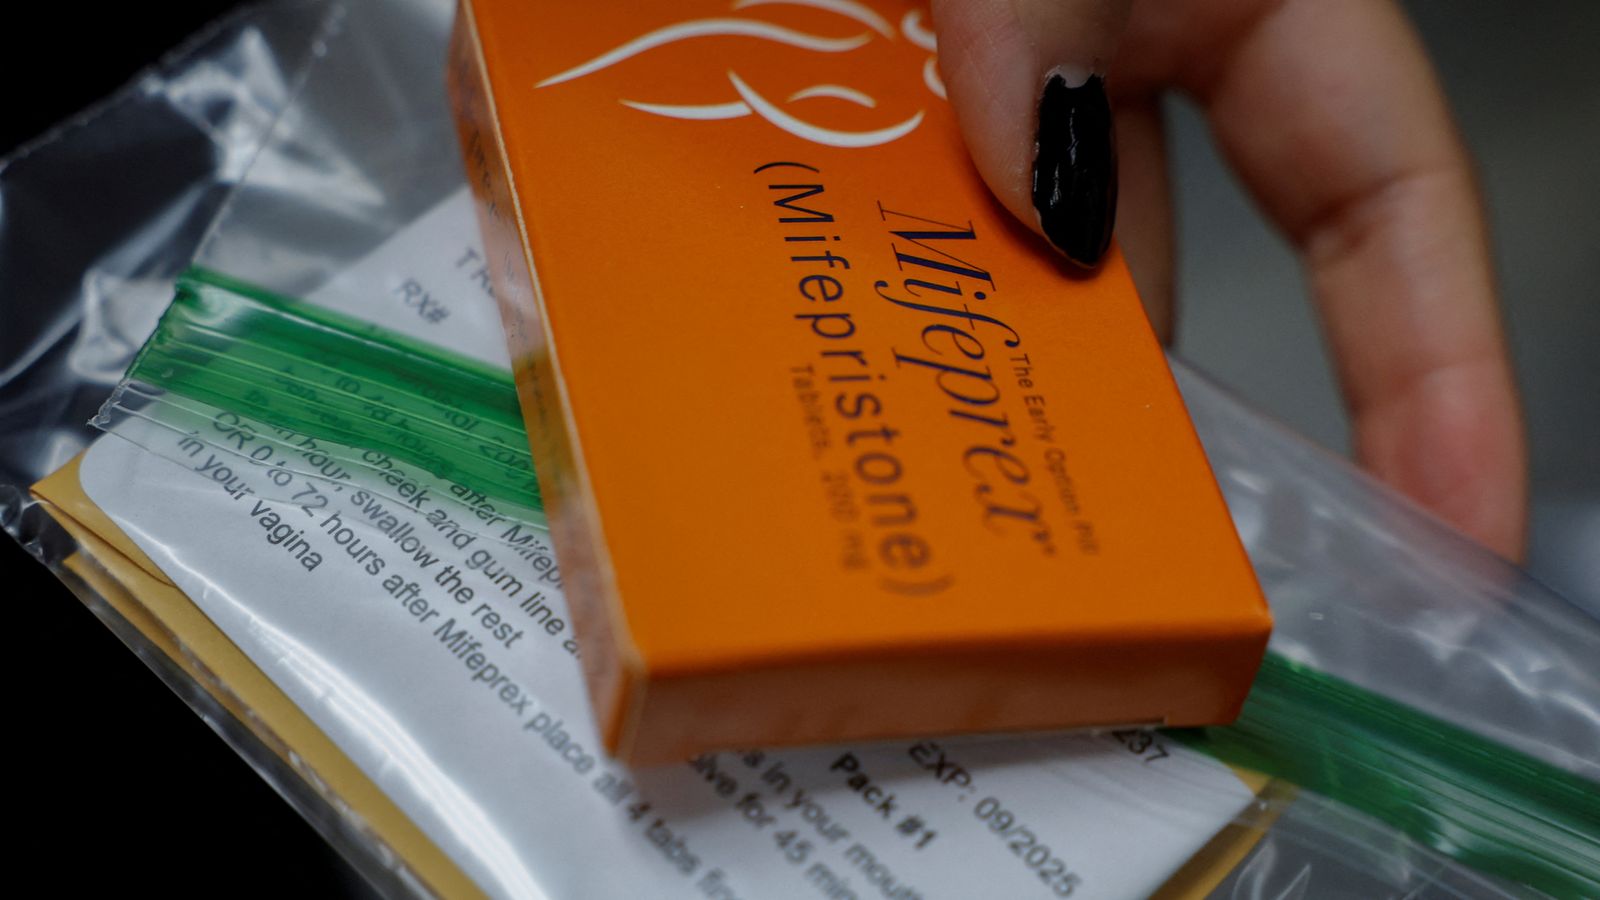 US Supreme Court rejects bid to restrict access to abortion pill mifepristone